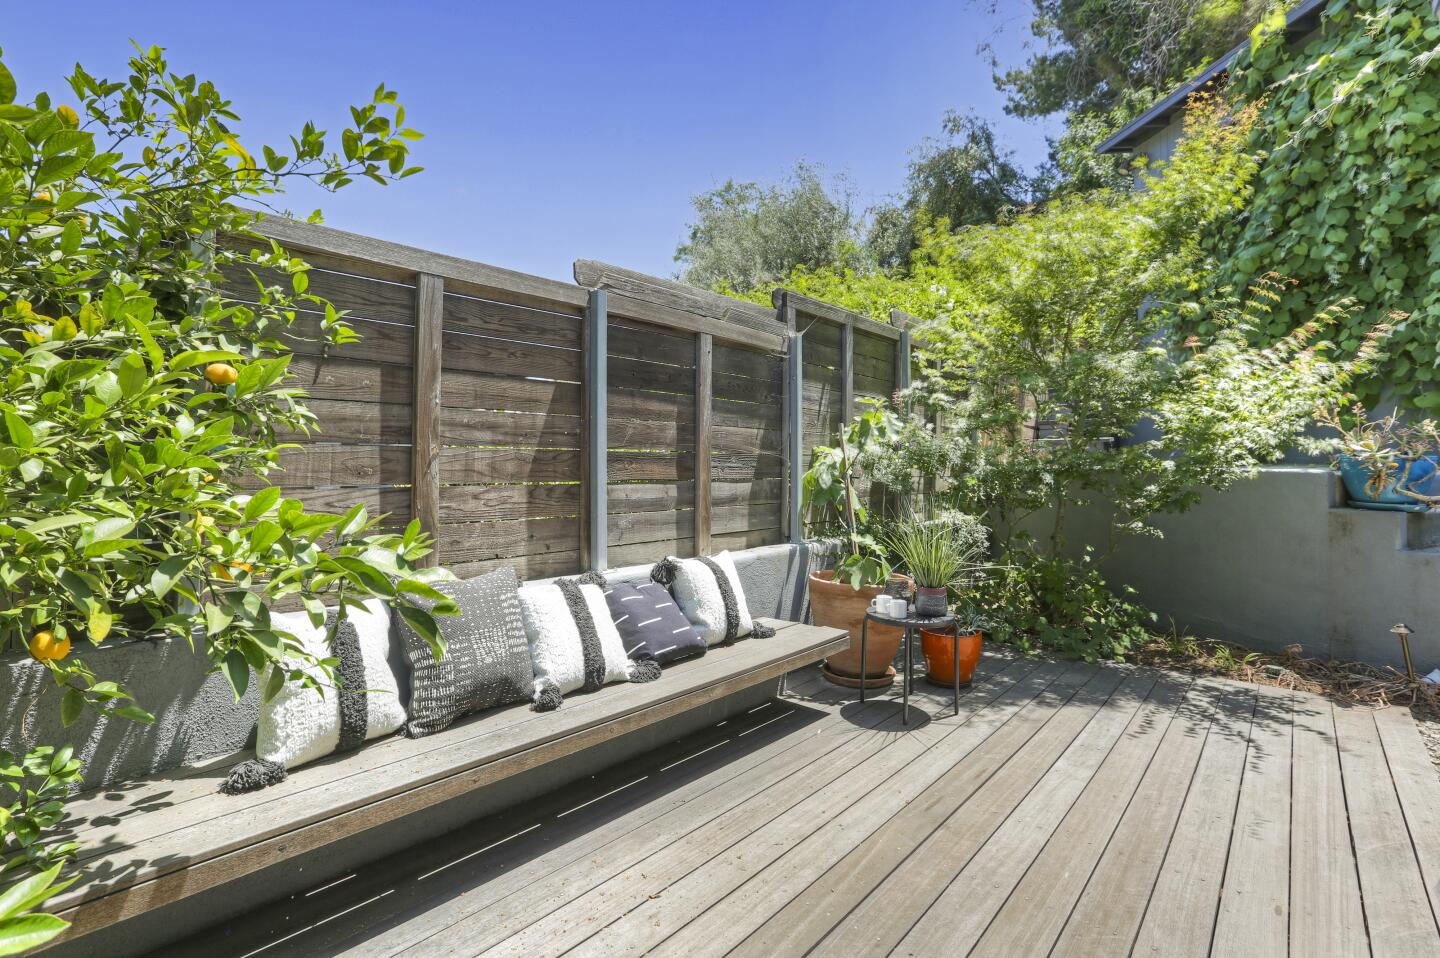 The outdoor decking.